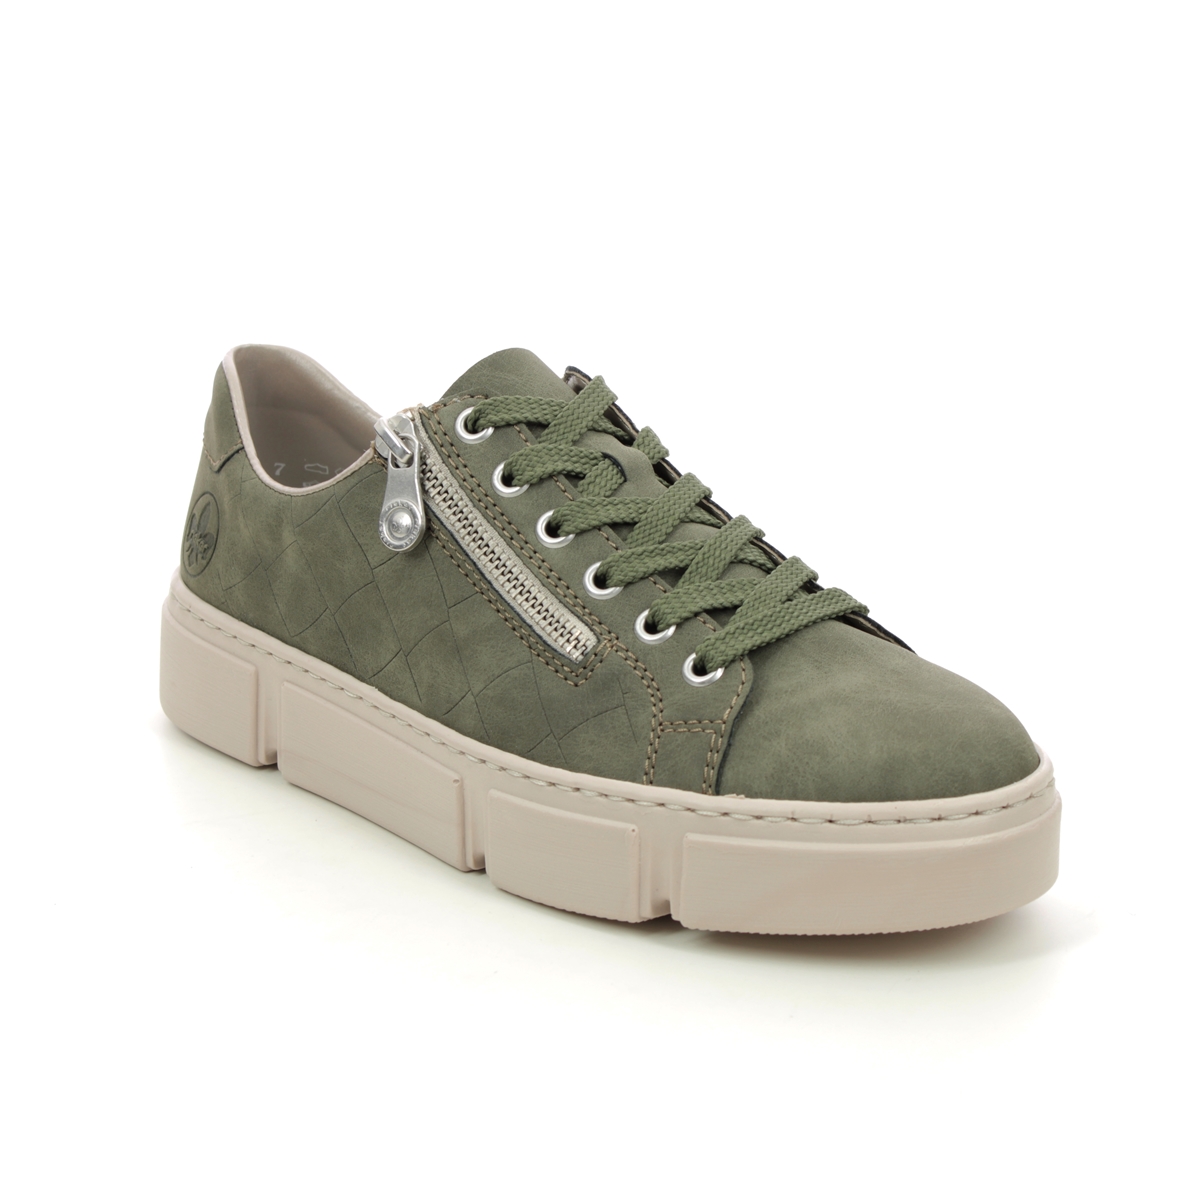 Rieker Hagenzi Olive Suede Womens Trainers N5935-54 In Size 42 In Plain Olive Suede